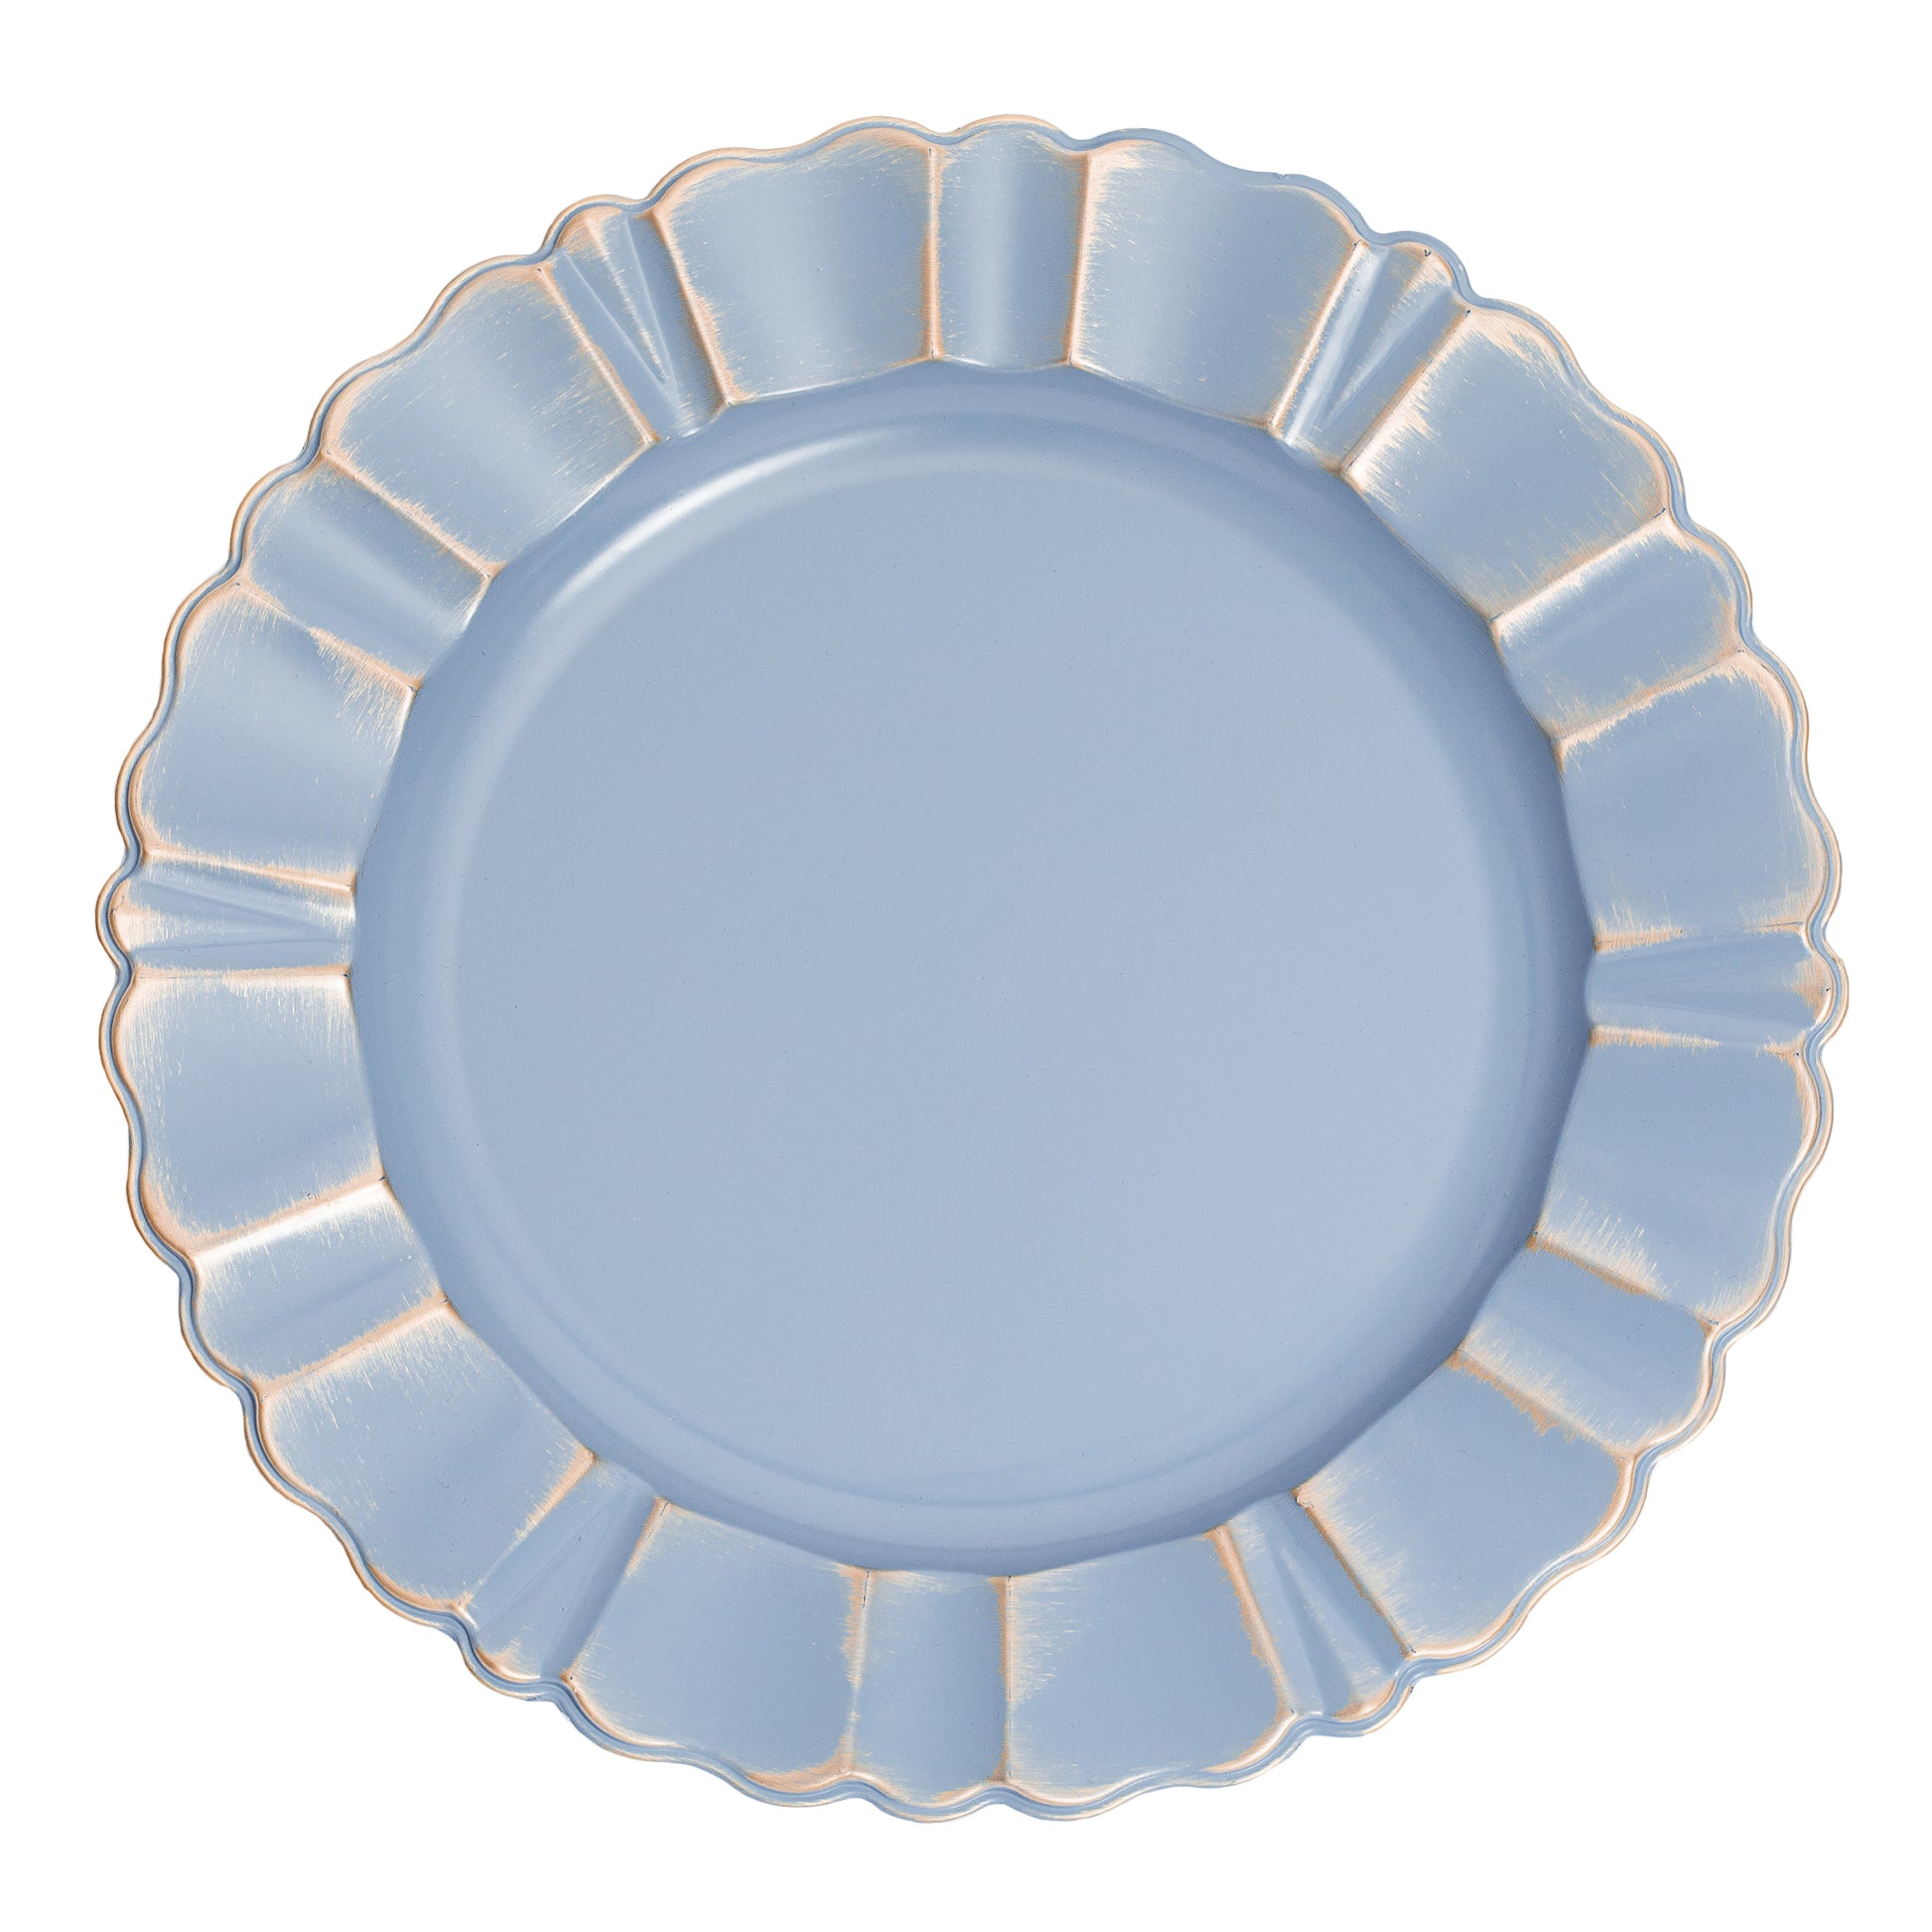 Waved Scalloped Acrylic 13" Charger Plate - Dusty Blue & Gold - CV Linens